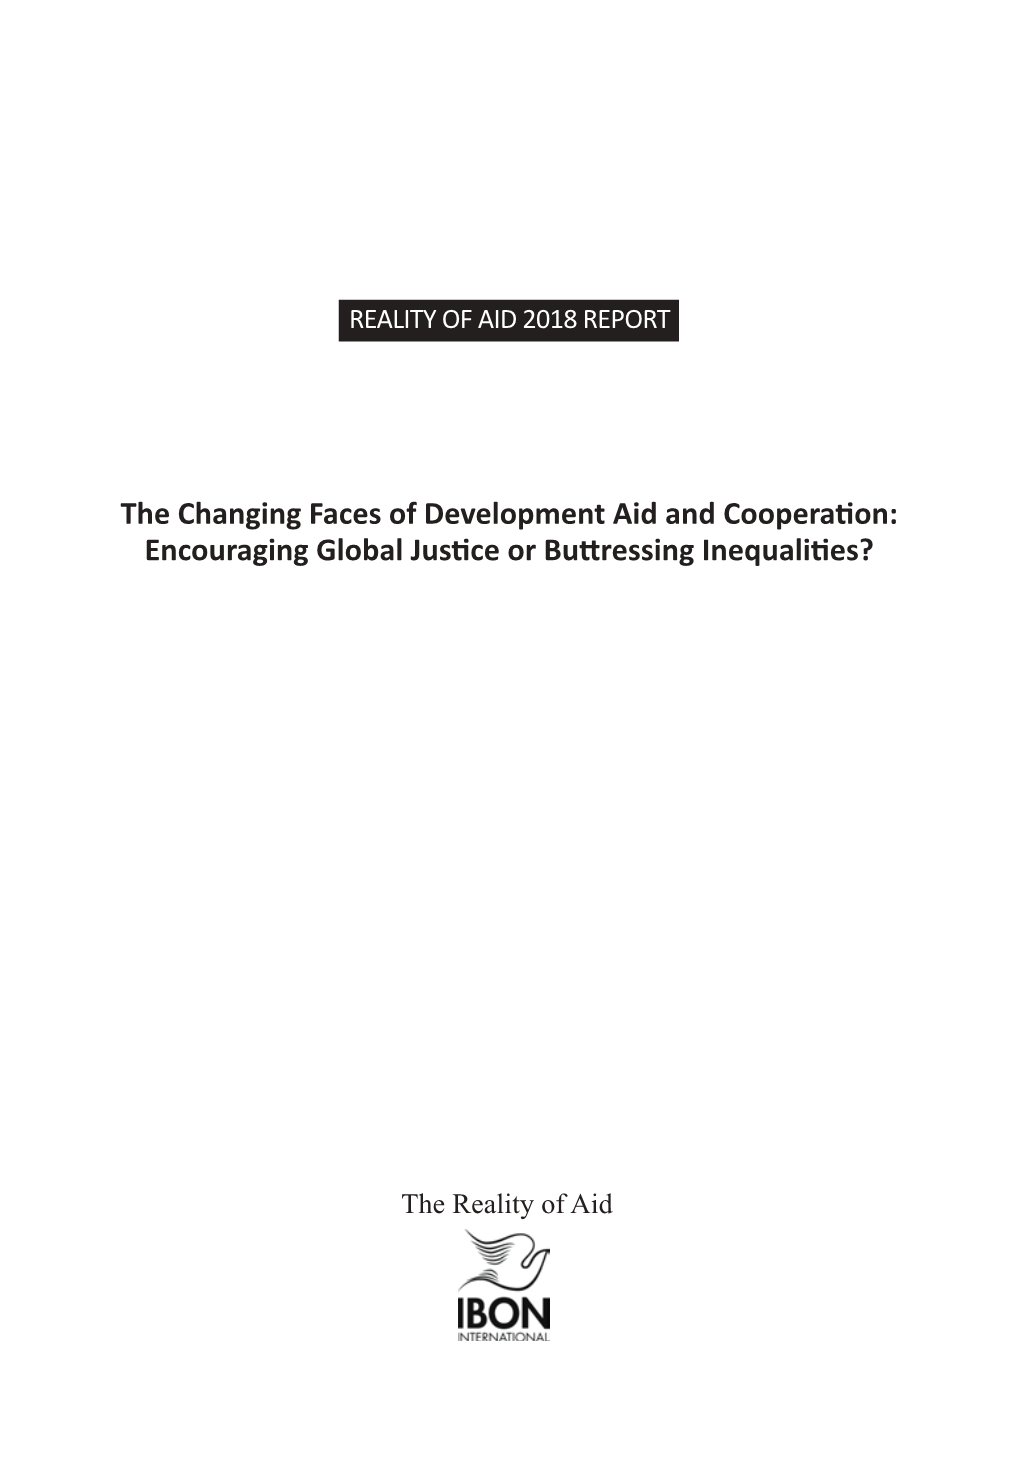 The Changing Faces of Development Aid and Cooperation: Encouraging Global Justice Or Buttressing Inequalities?